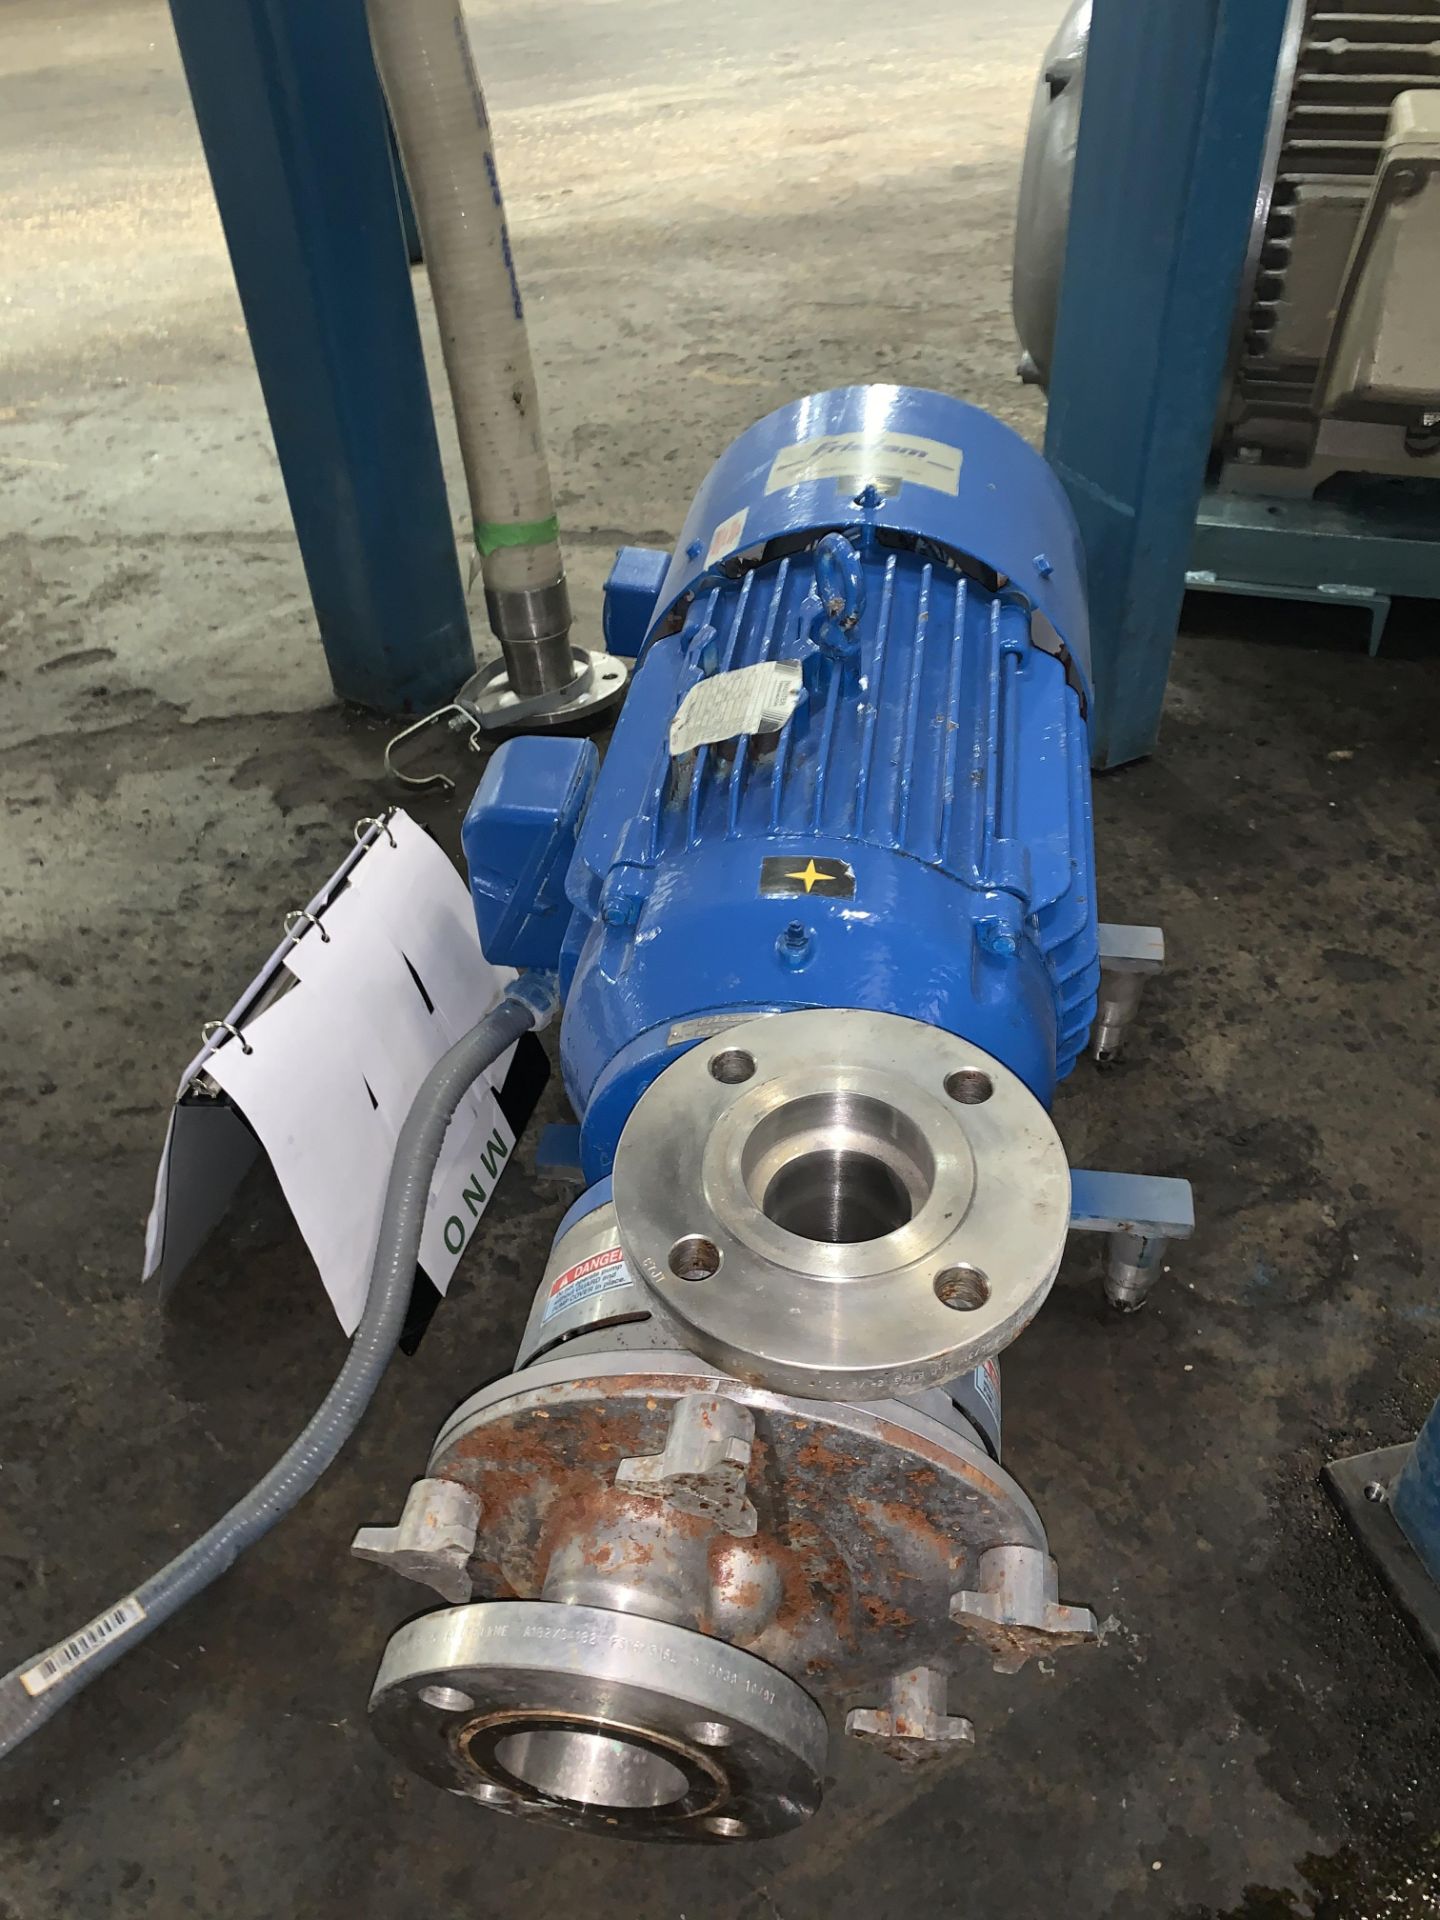 Frisam Stainless Steel Pump with super efficient Baldor 15HP motor rated at two speeds of 1750 and - Bild 7 aus 8